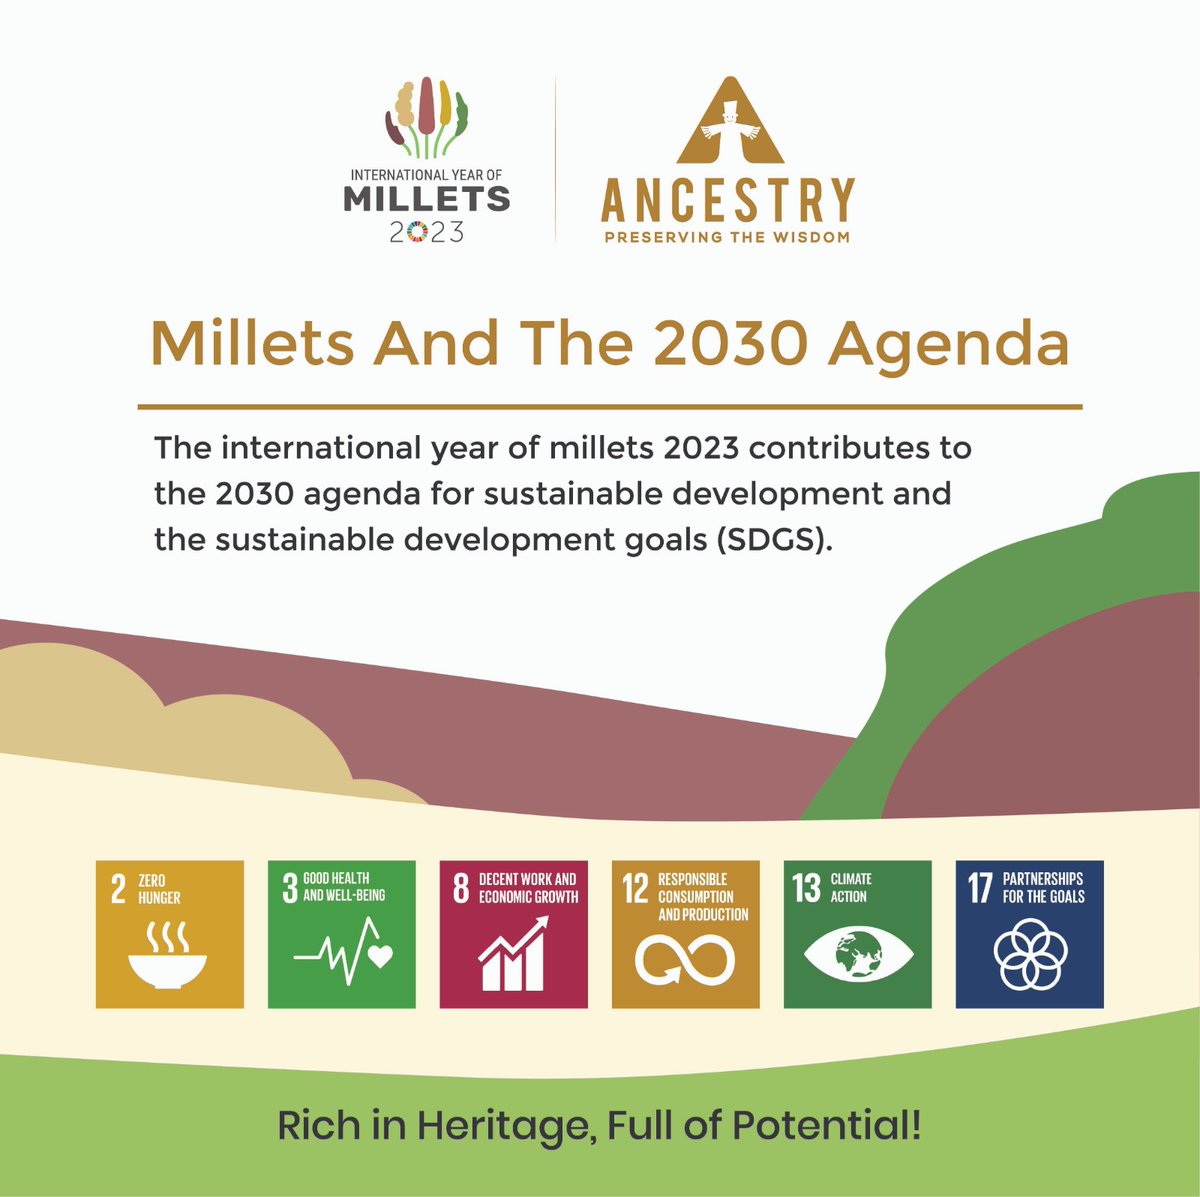 Ancestry Millets Private Limited wishes you all a Happy, delicious, and nutritious- International year of Millets 2023!
#iym2023 #millets #healthyfood #ragi #healthylife #glutenfree #healthyeating #jowar #bajra #fingermillet #sorghum #functionalfoods
#ancestry #ancestrymillets